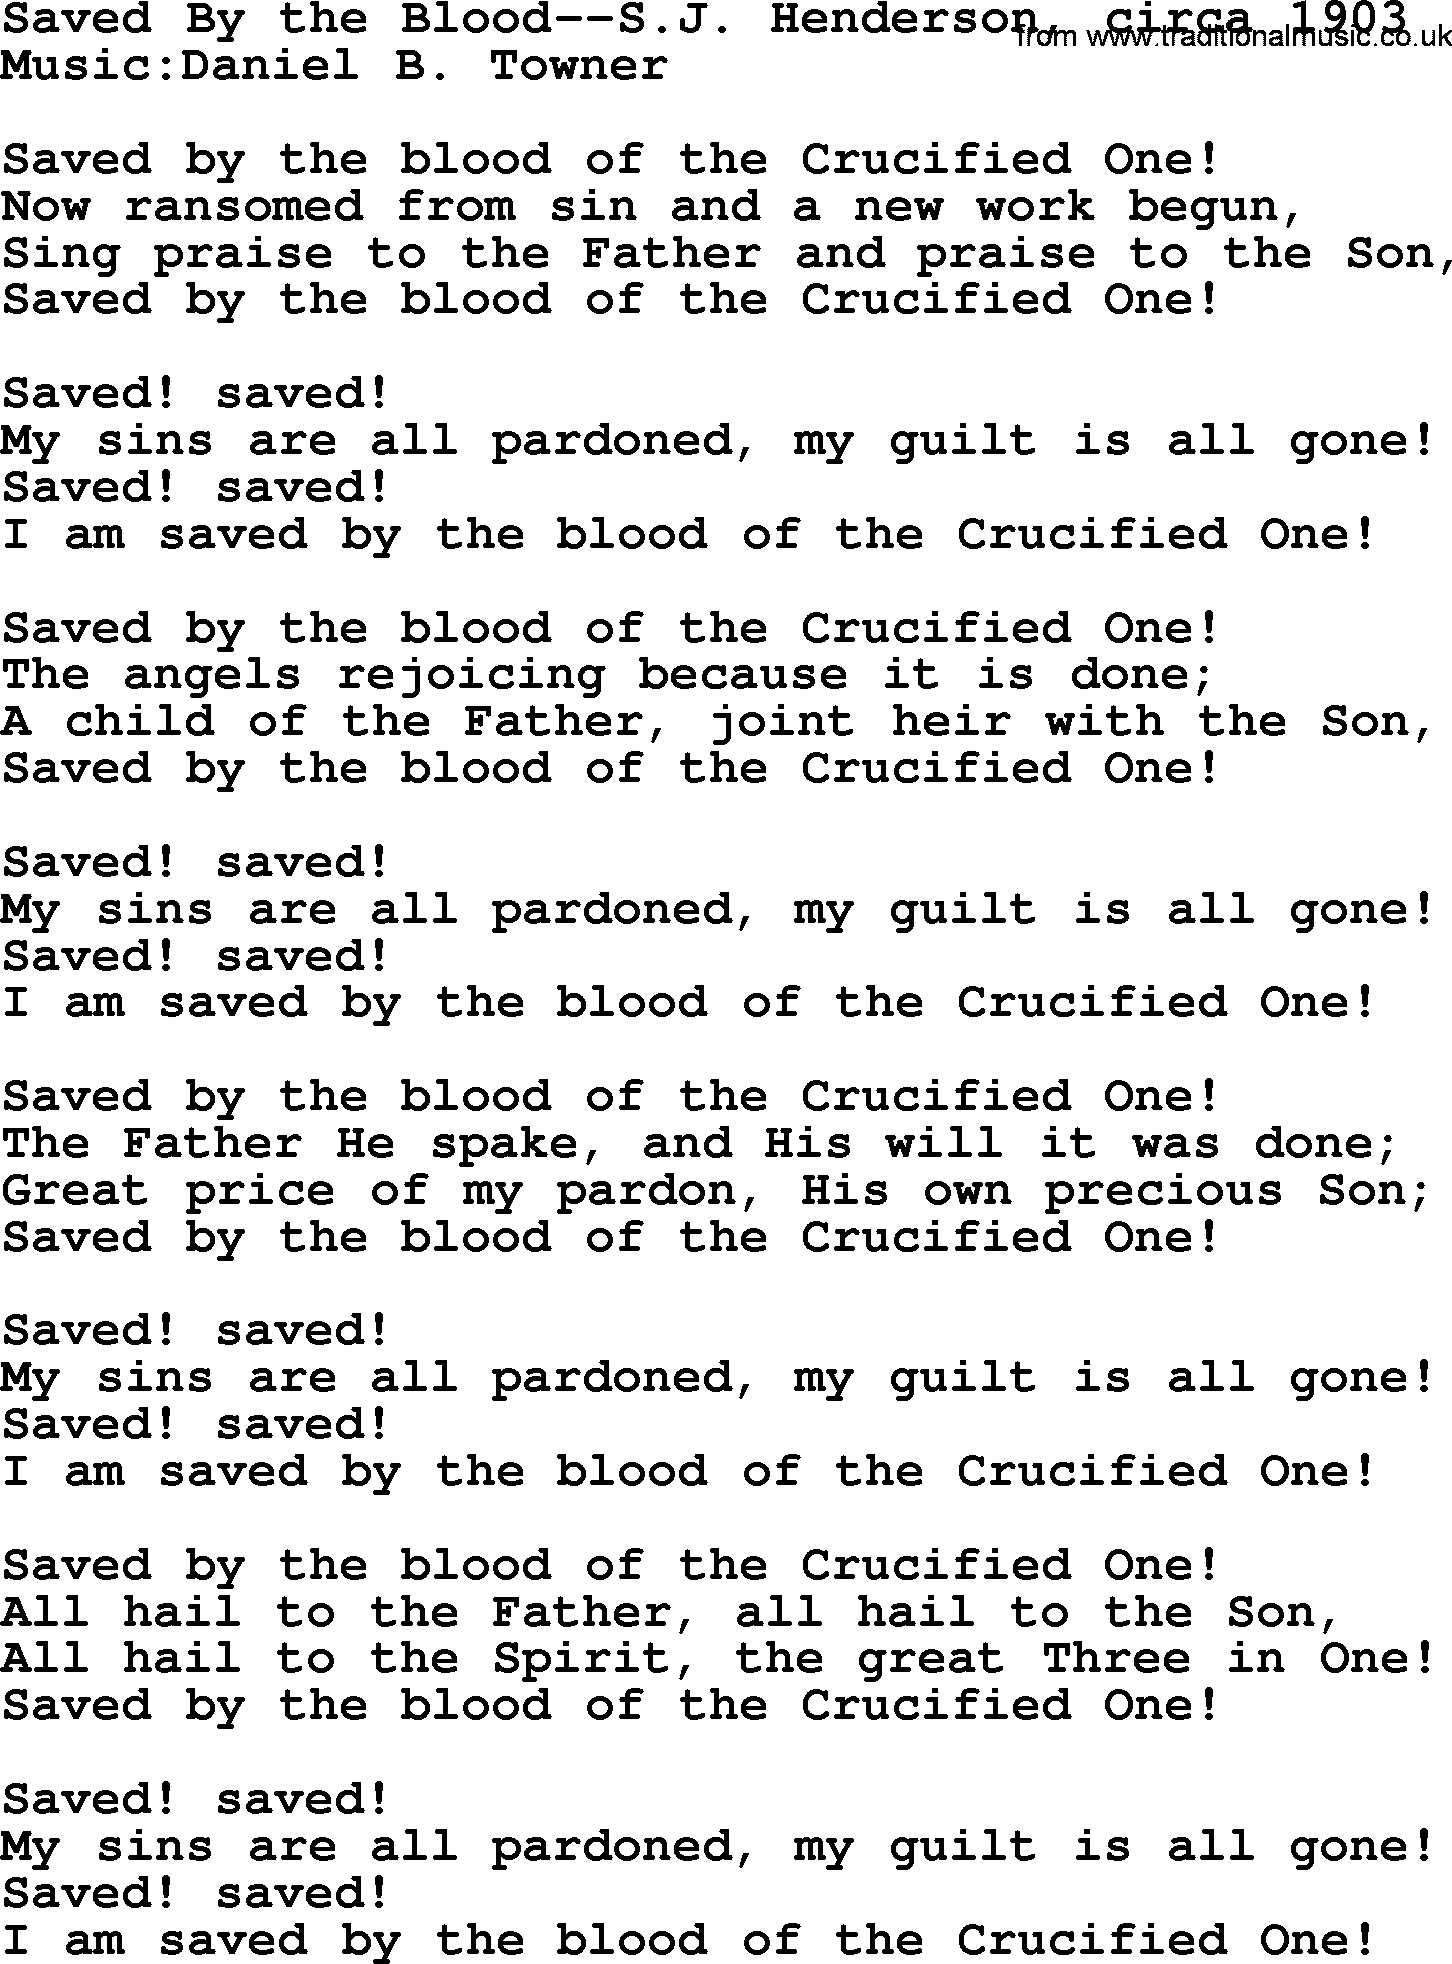 Hymns from the Psalms, Hymn: Saved By The Blood-S.J. Henderson, Circa 1903, lyrics with PDF